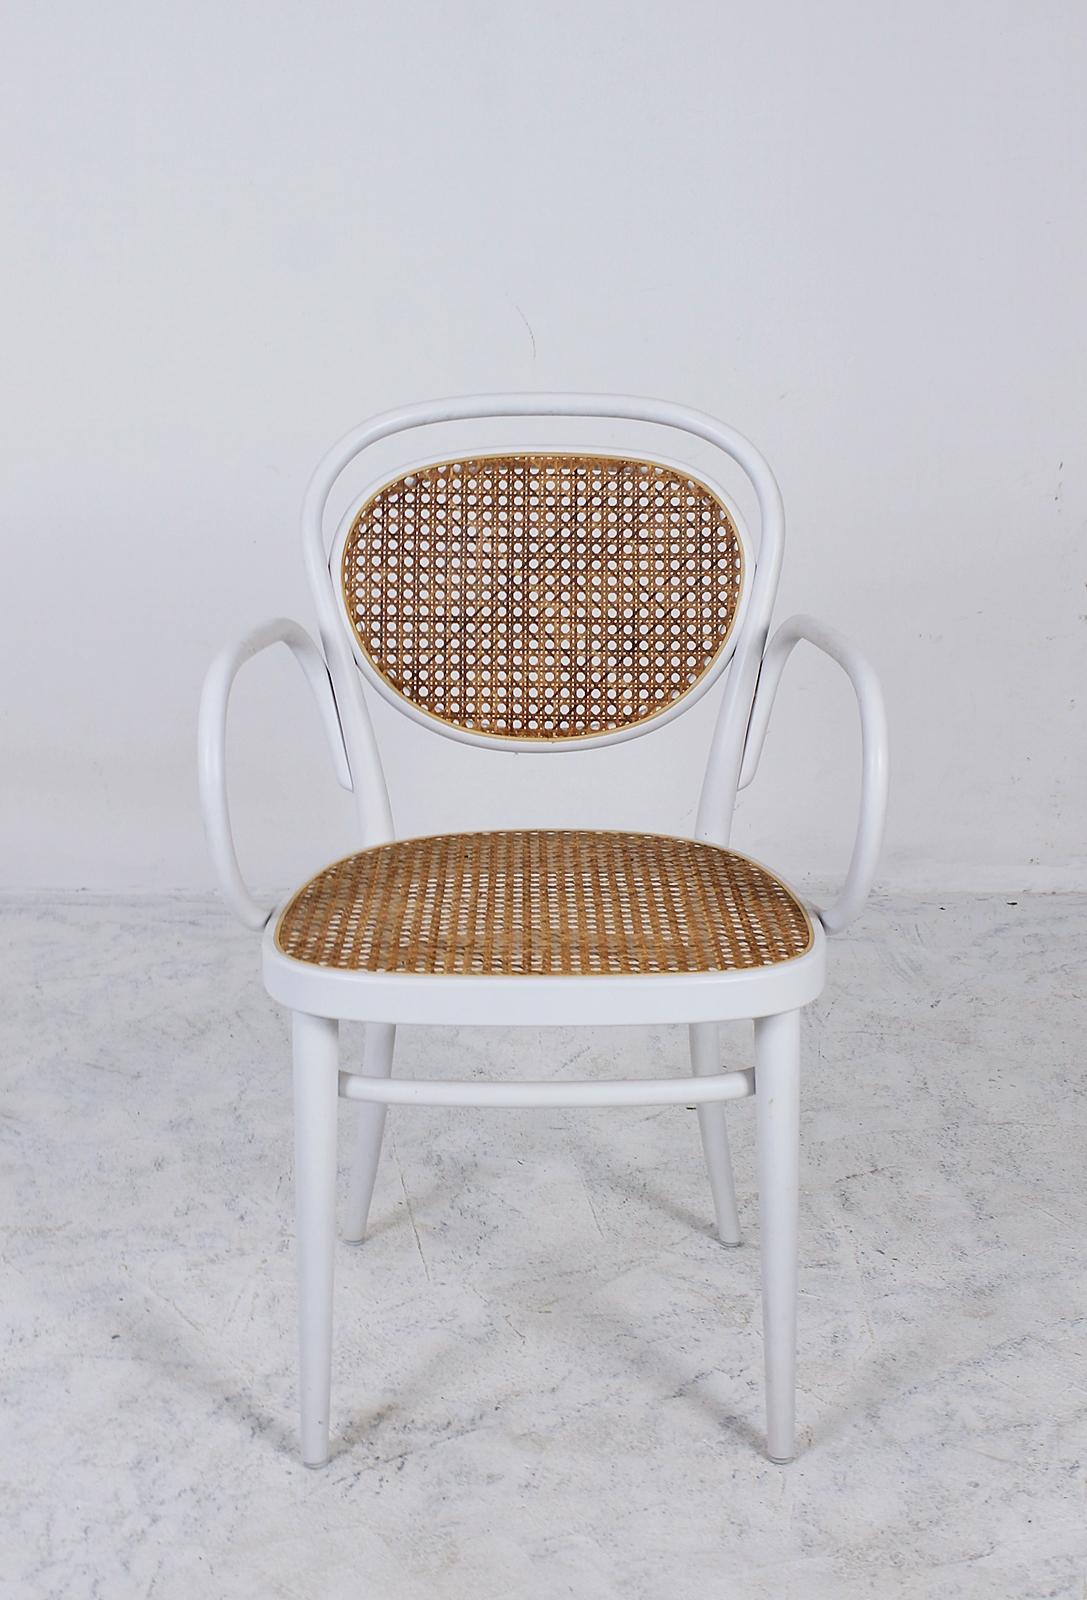 This set of 4 Thonet no. 215 (coffee house) chairs was manufactured 2002 (as marked underneath the seat)
 The chair was designed by Michael Thonet in 1859.
 It features a beech bentwood frame and a rattan seat. Wood and rattan are in good